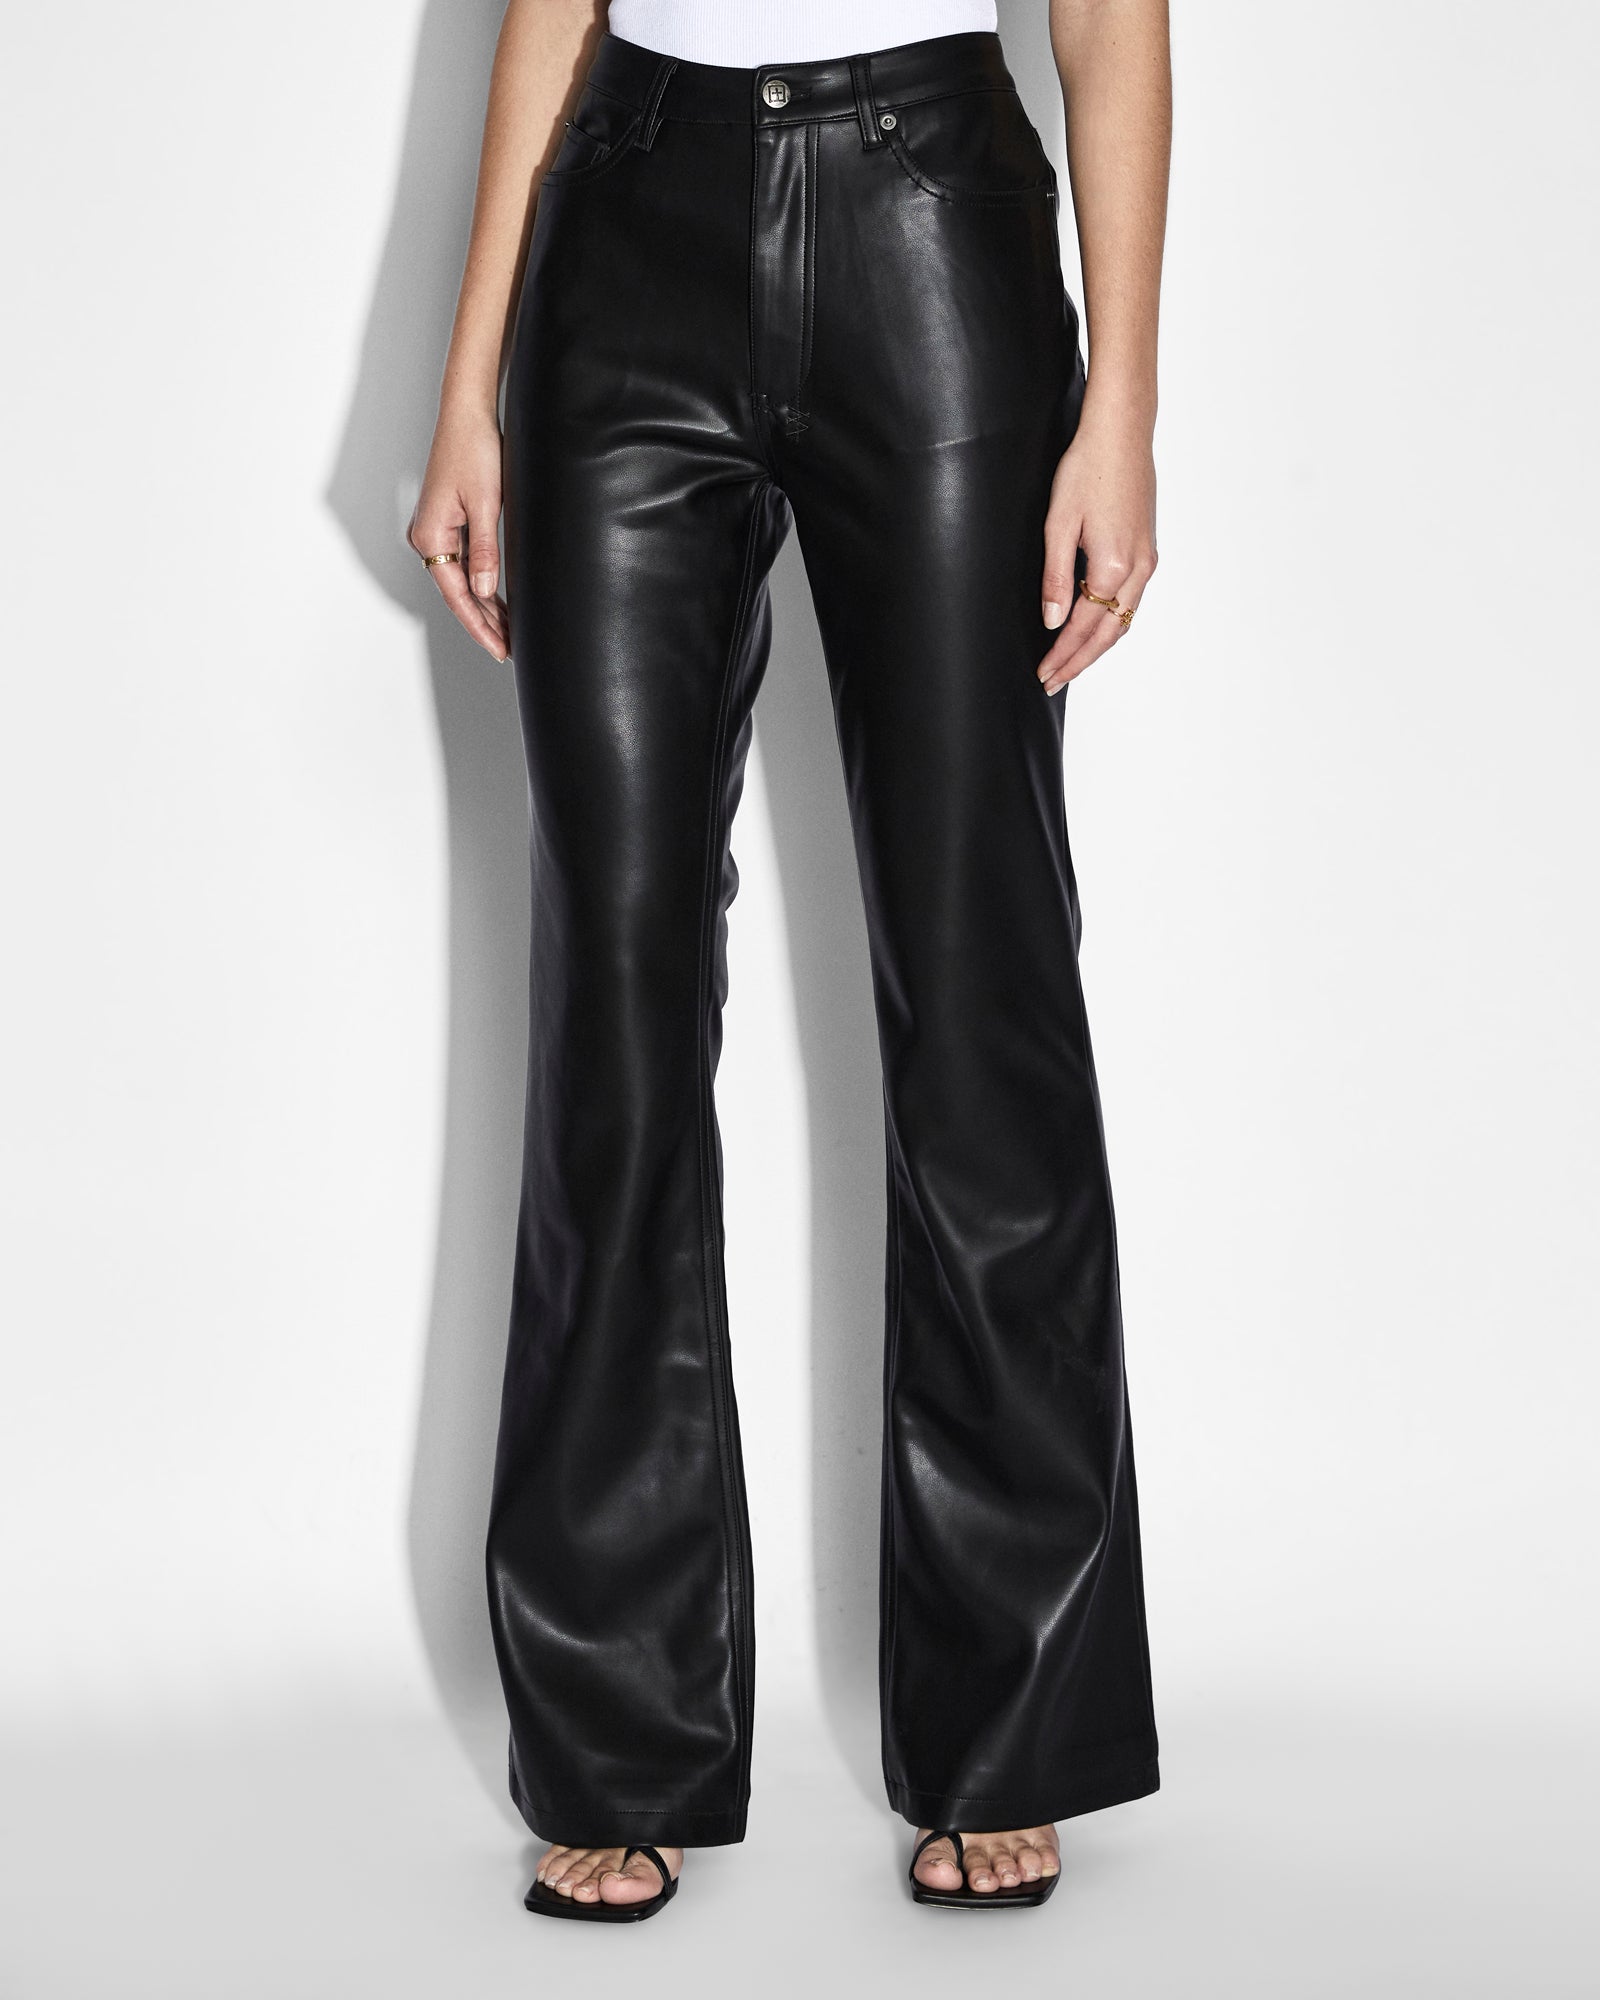 Buy Black PU Faux Leather Leggings from Next Germany